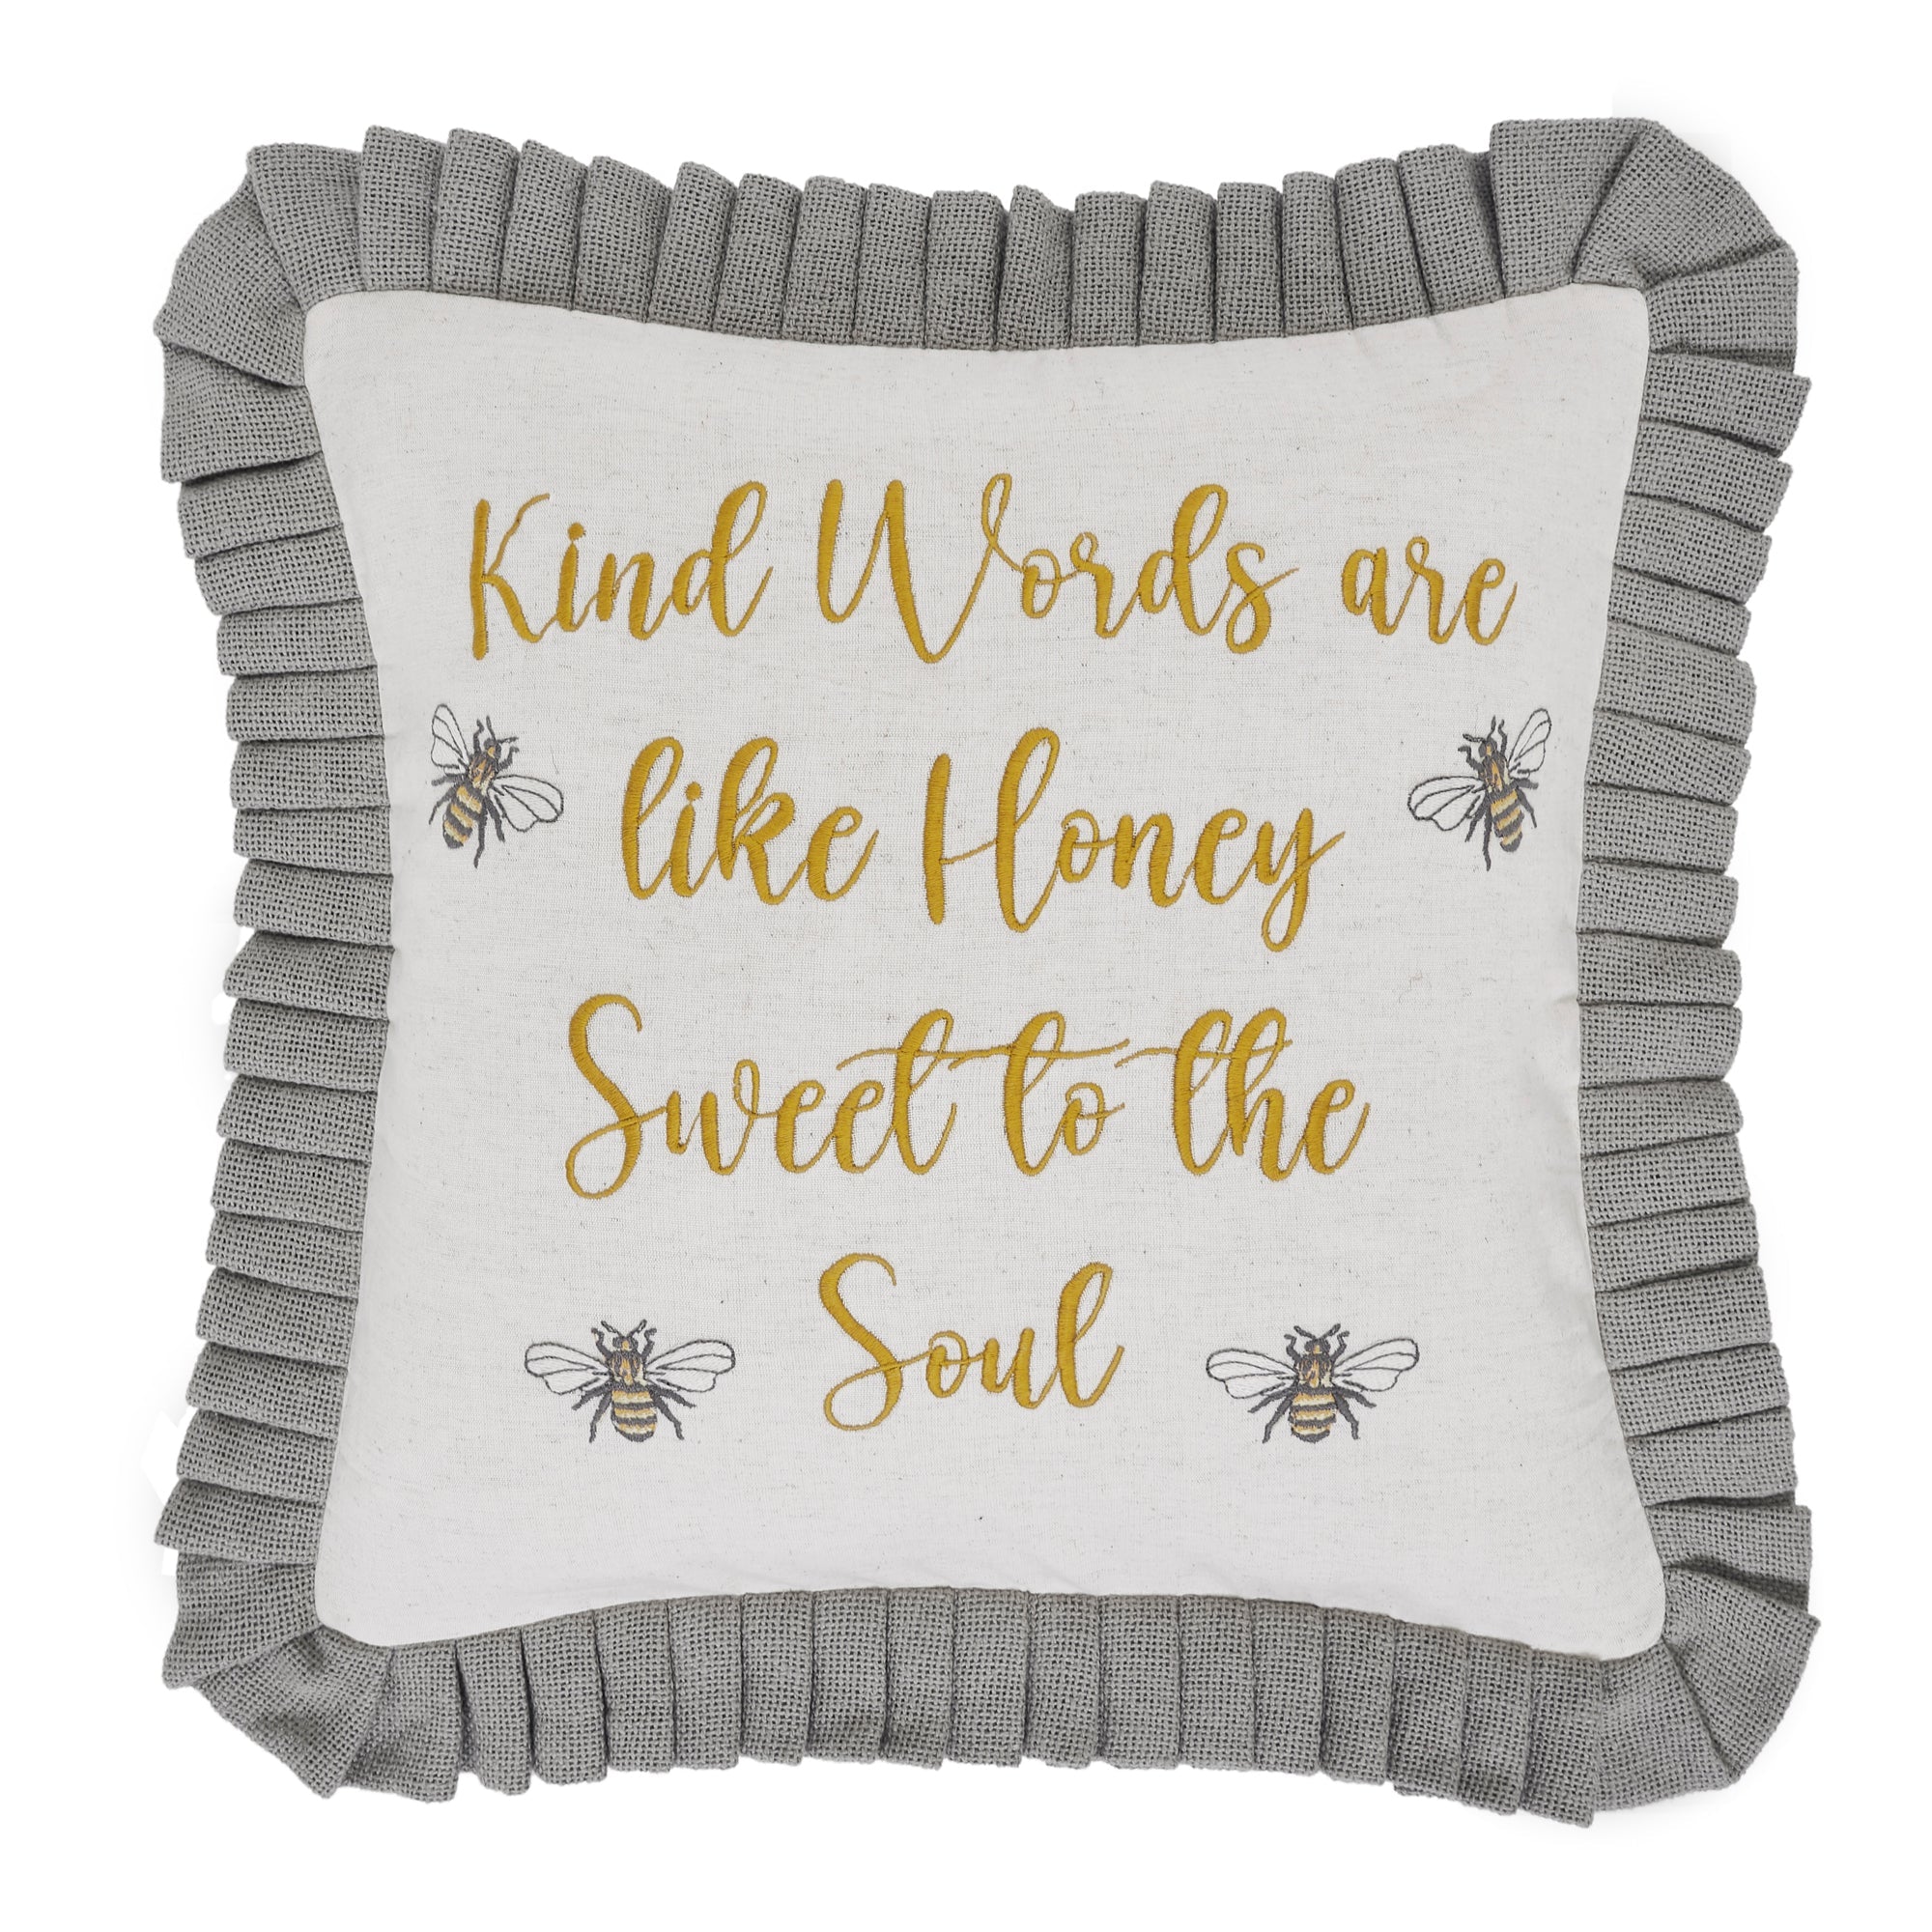 Embroidered Bee Honey Pillow 18x18 VHC Brands